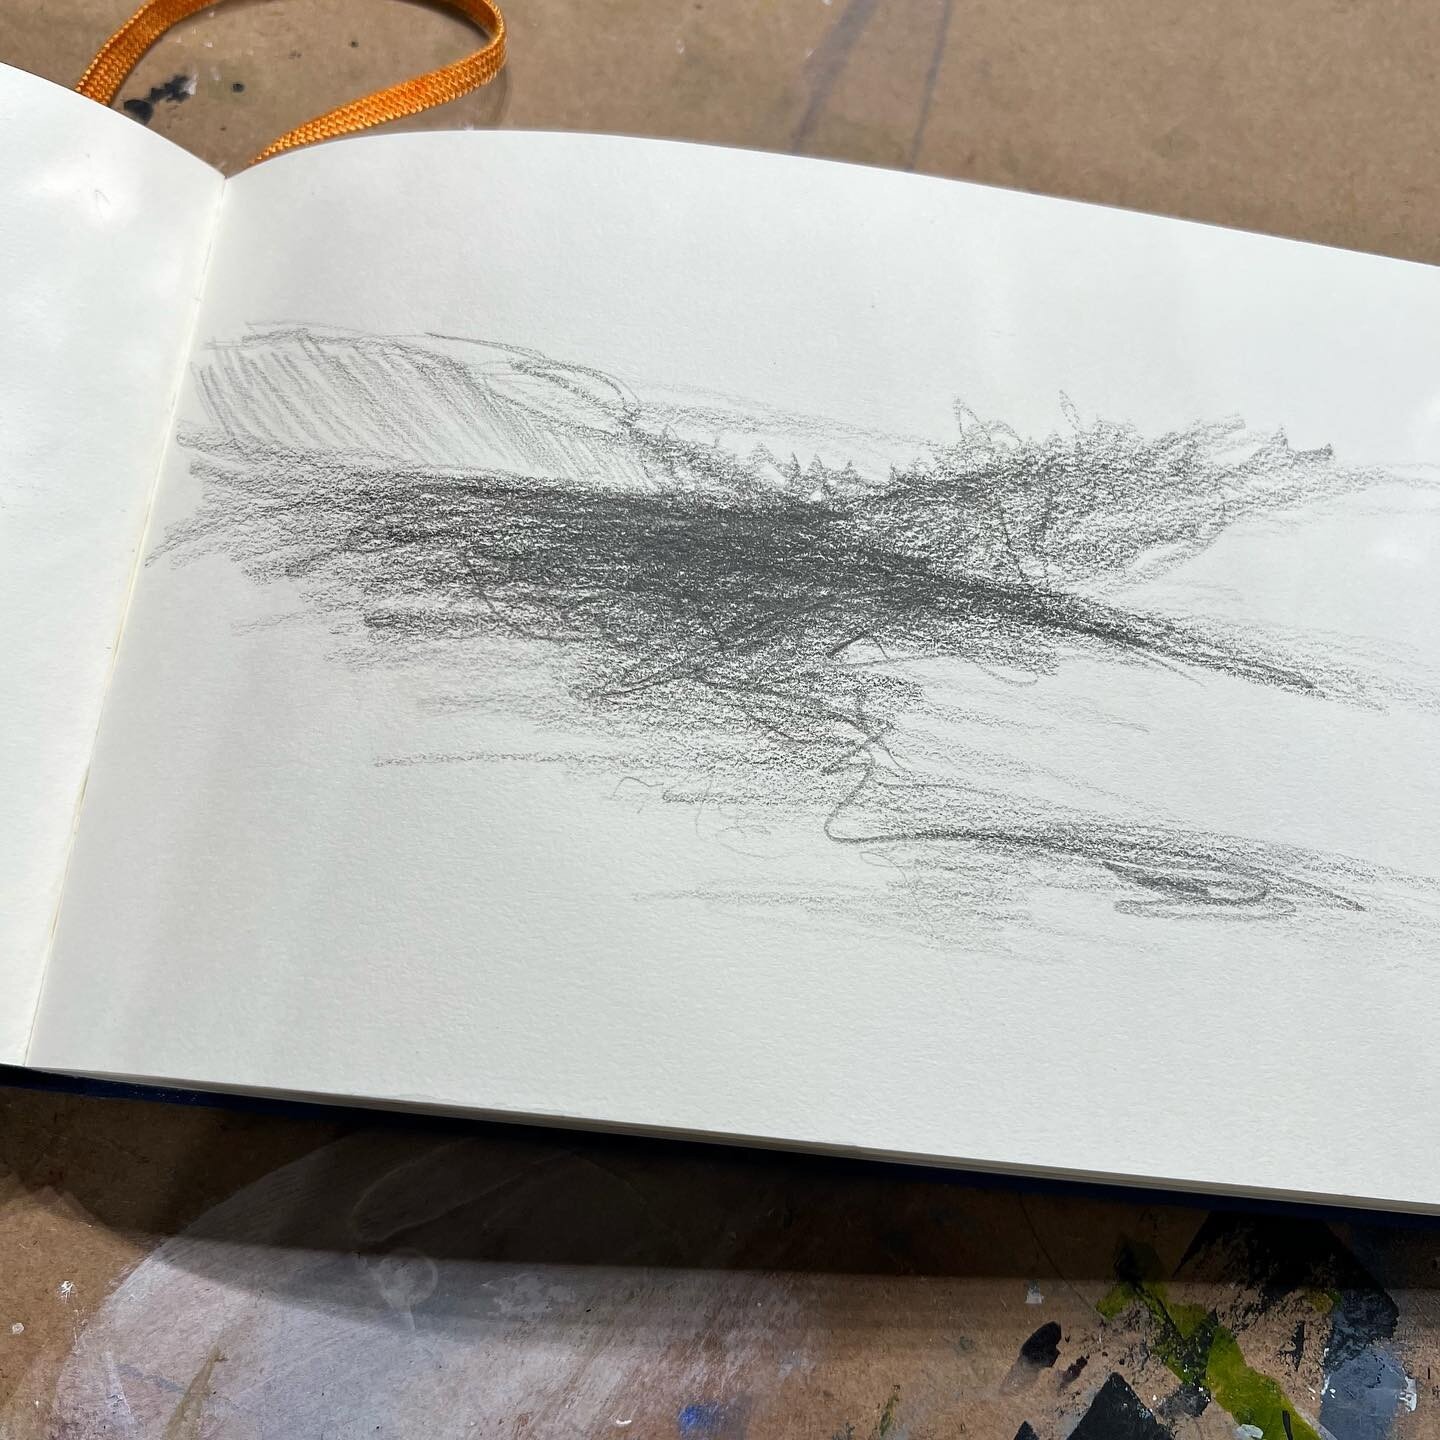 A short sketchbook tour today. Sometimes extreme heat and no AC in the studio just zaps your creative energies.